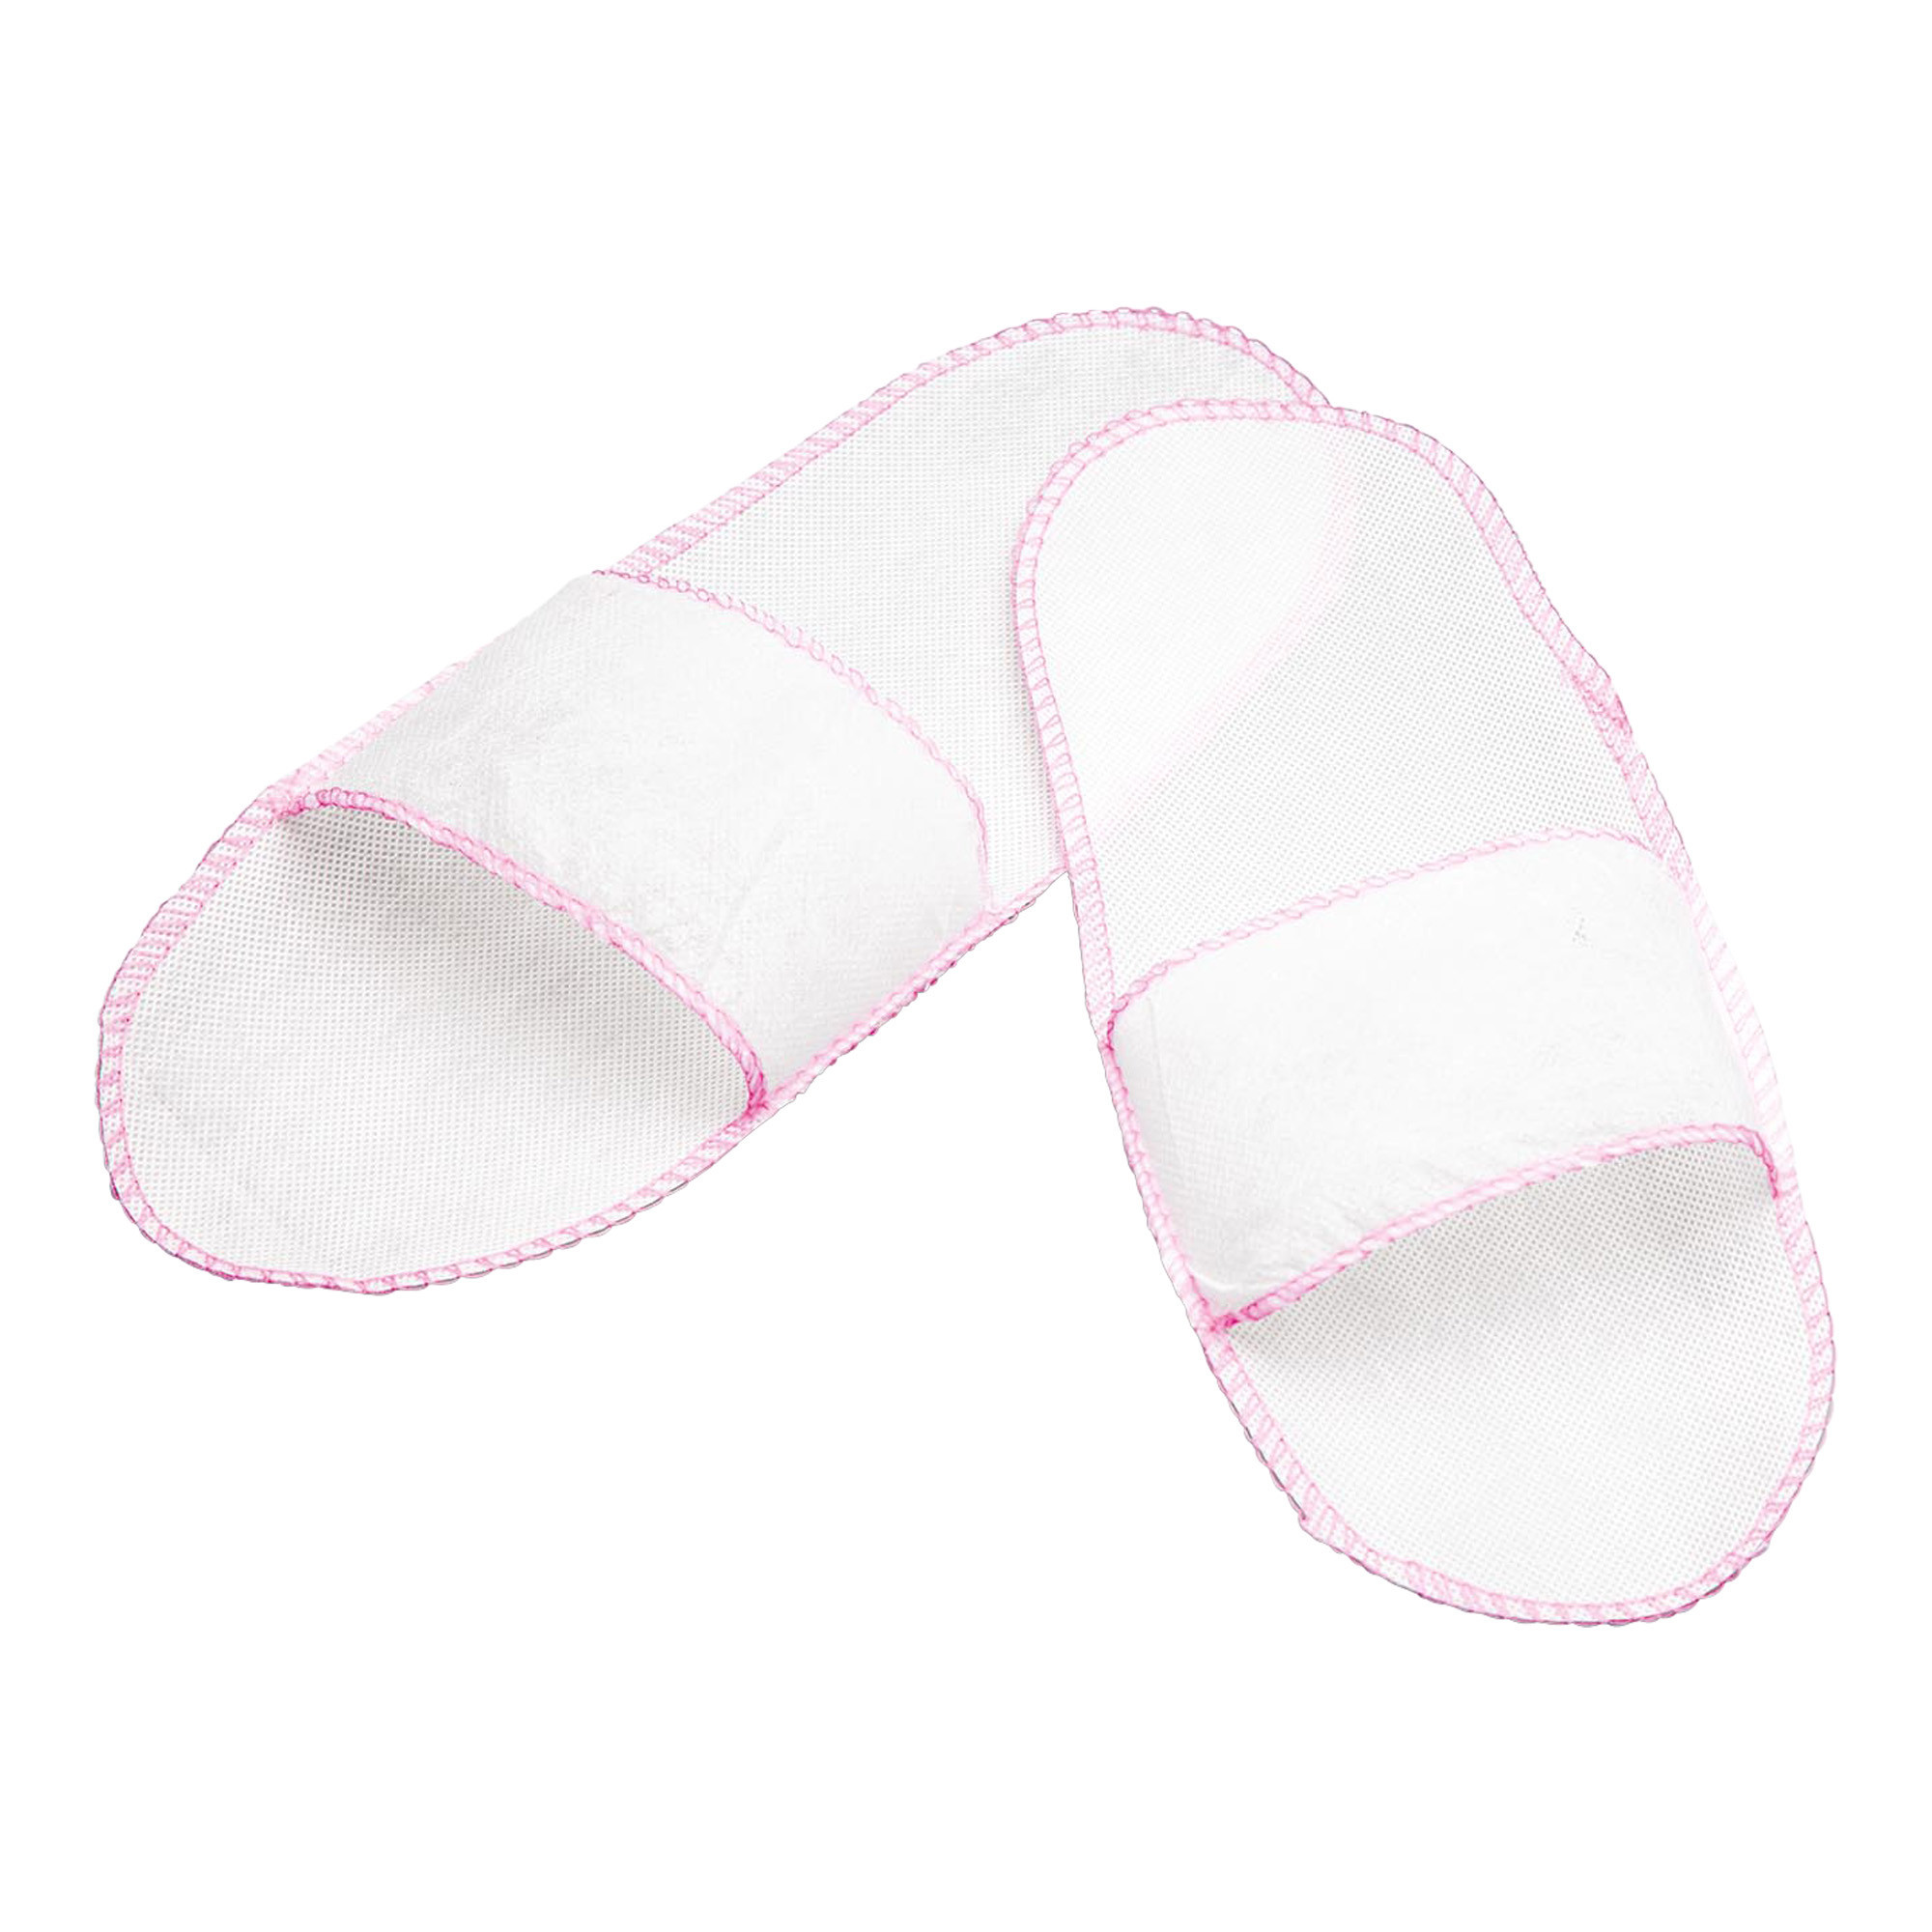 TNT disposable open toe slippers 50 pairs